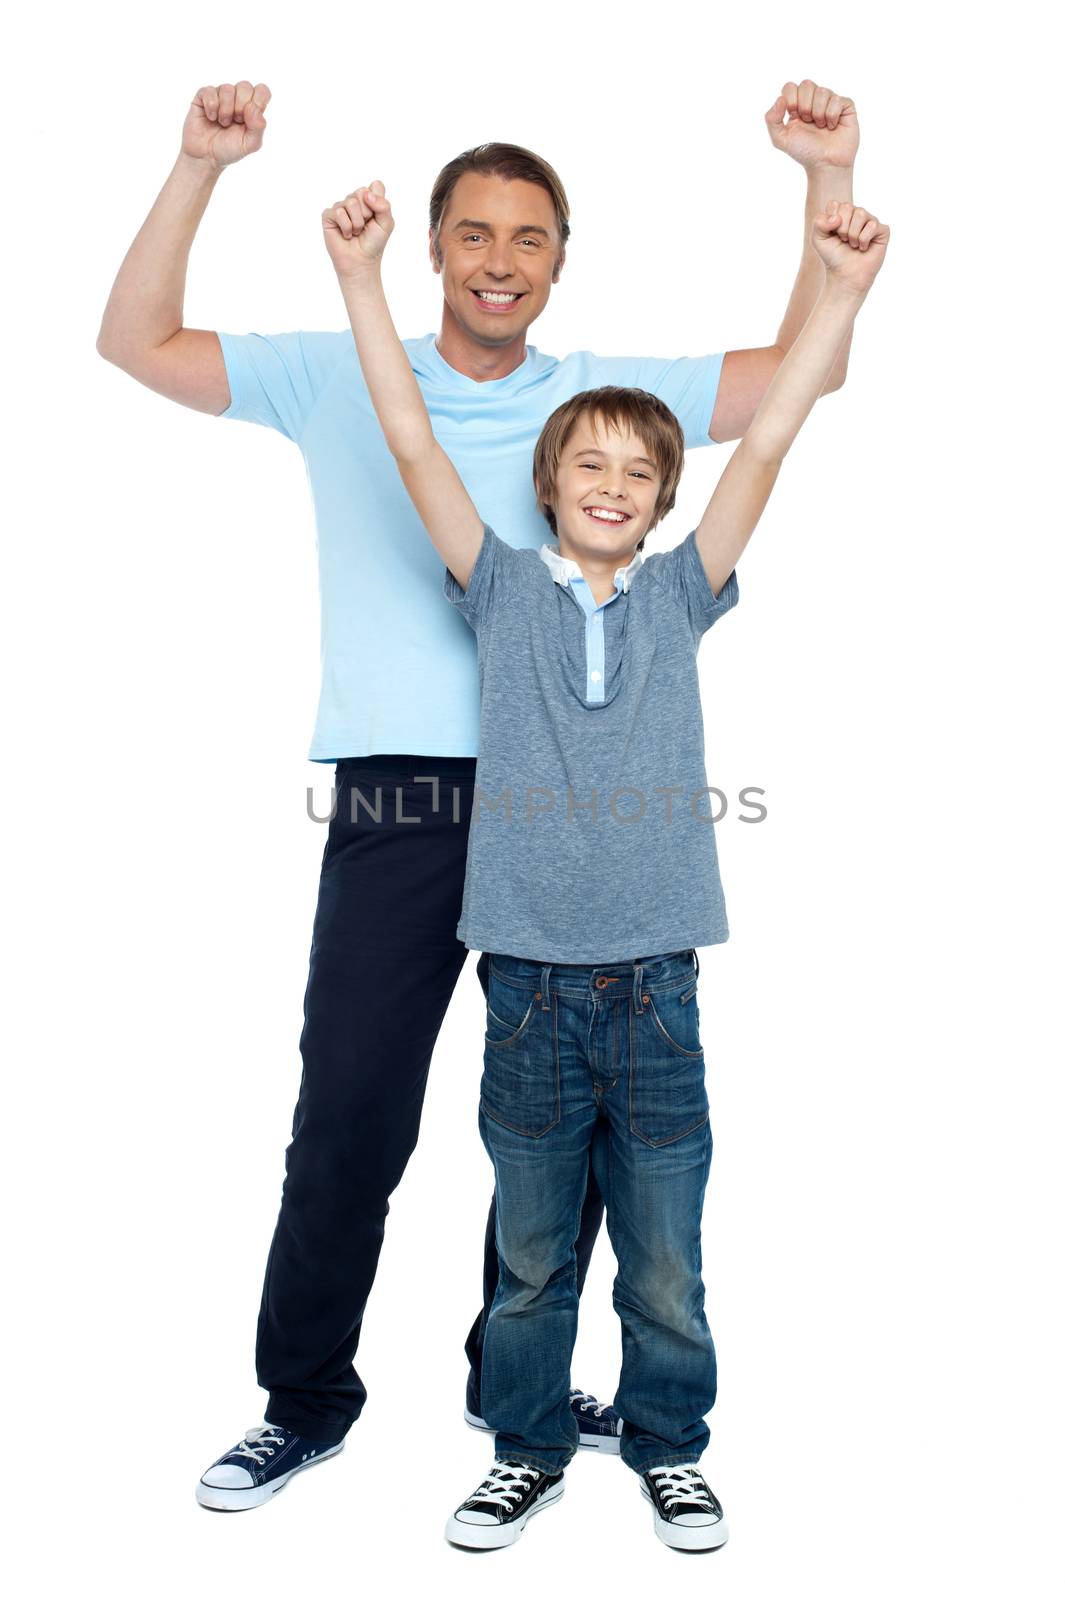 Father and son enjoying their victory